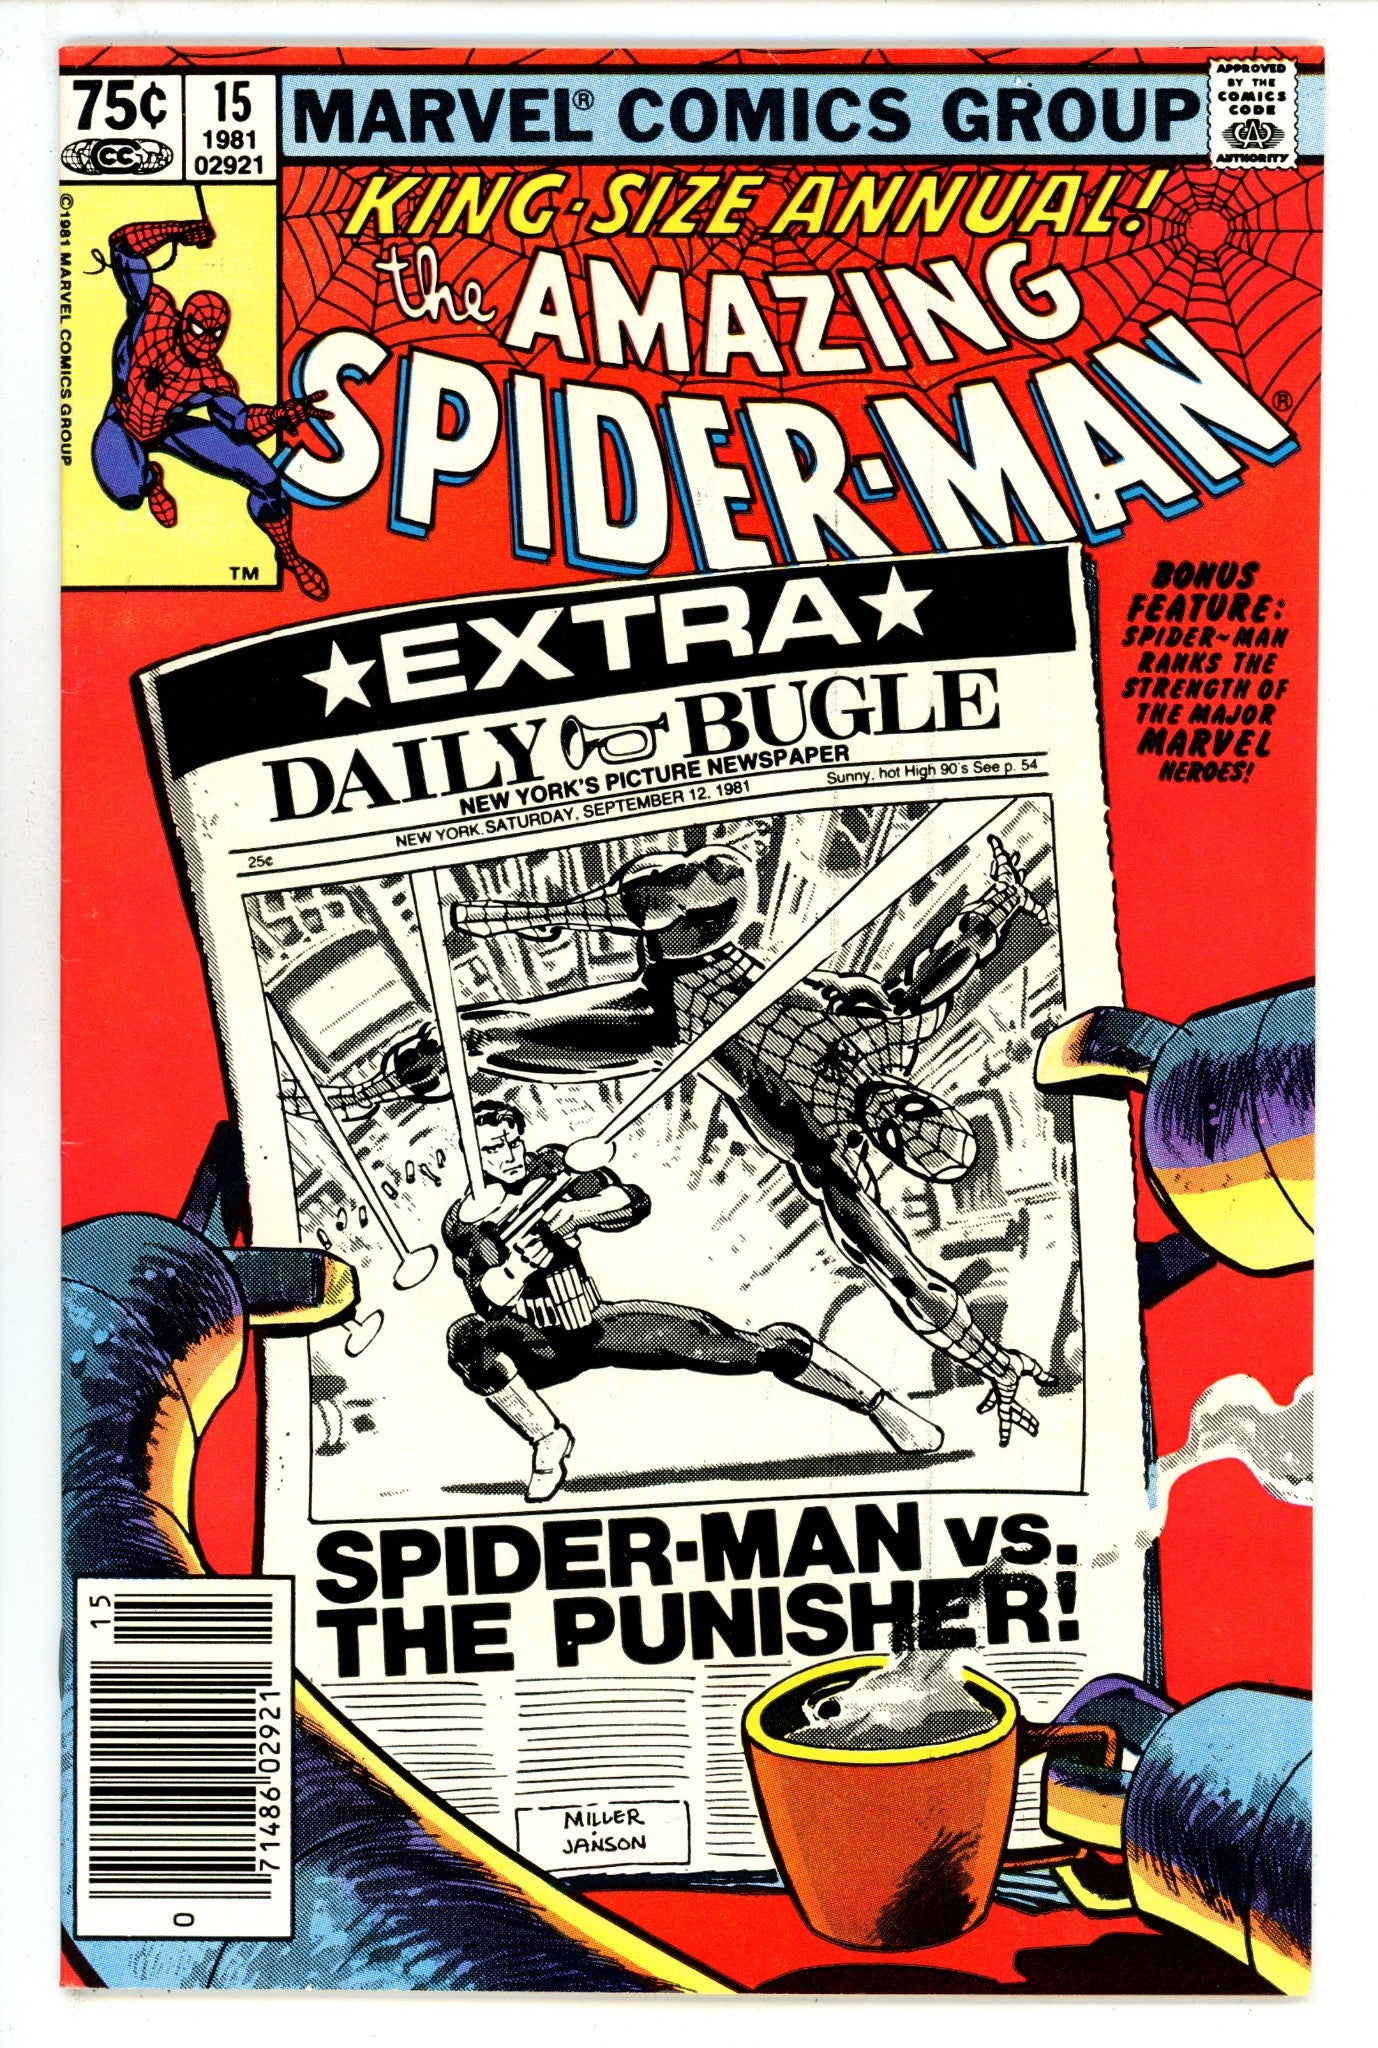 The Amazing Spider-Man Annual Vol 1 15 FN/VF (7.0) (1981) Newsstand 